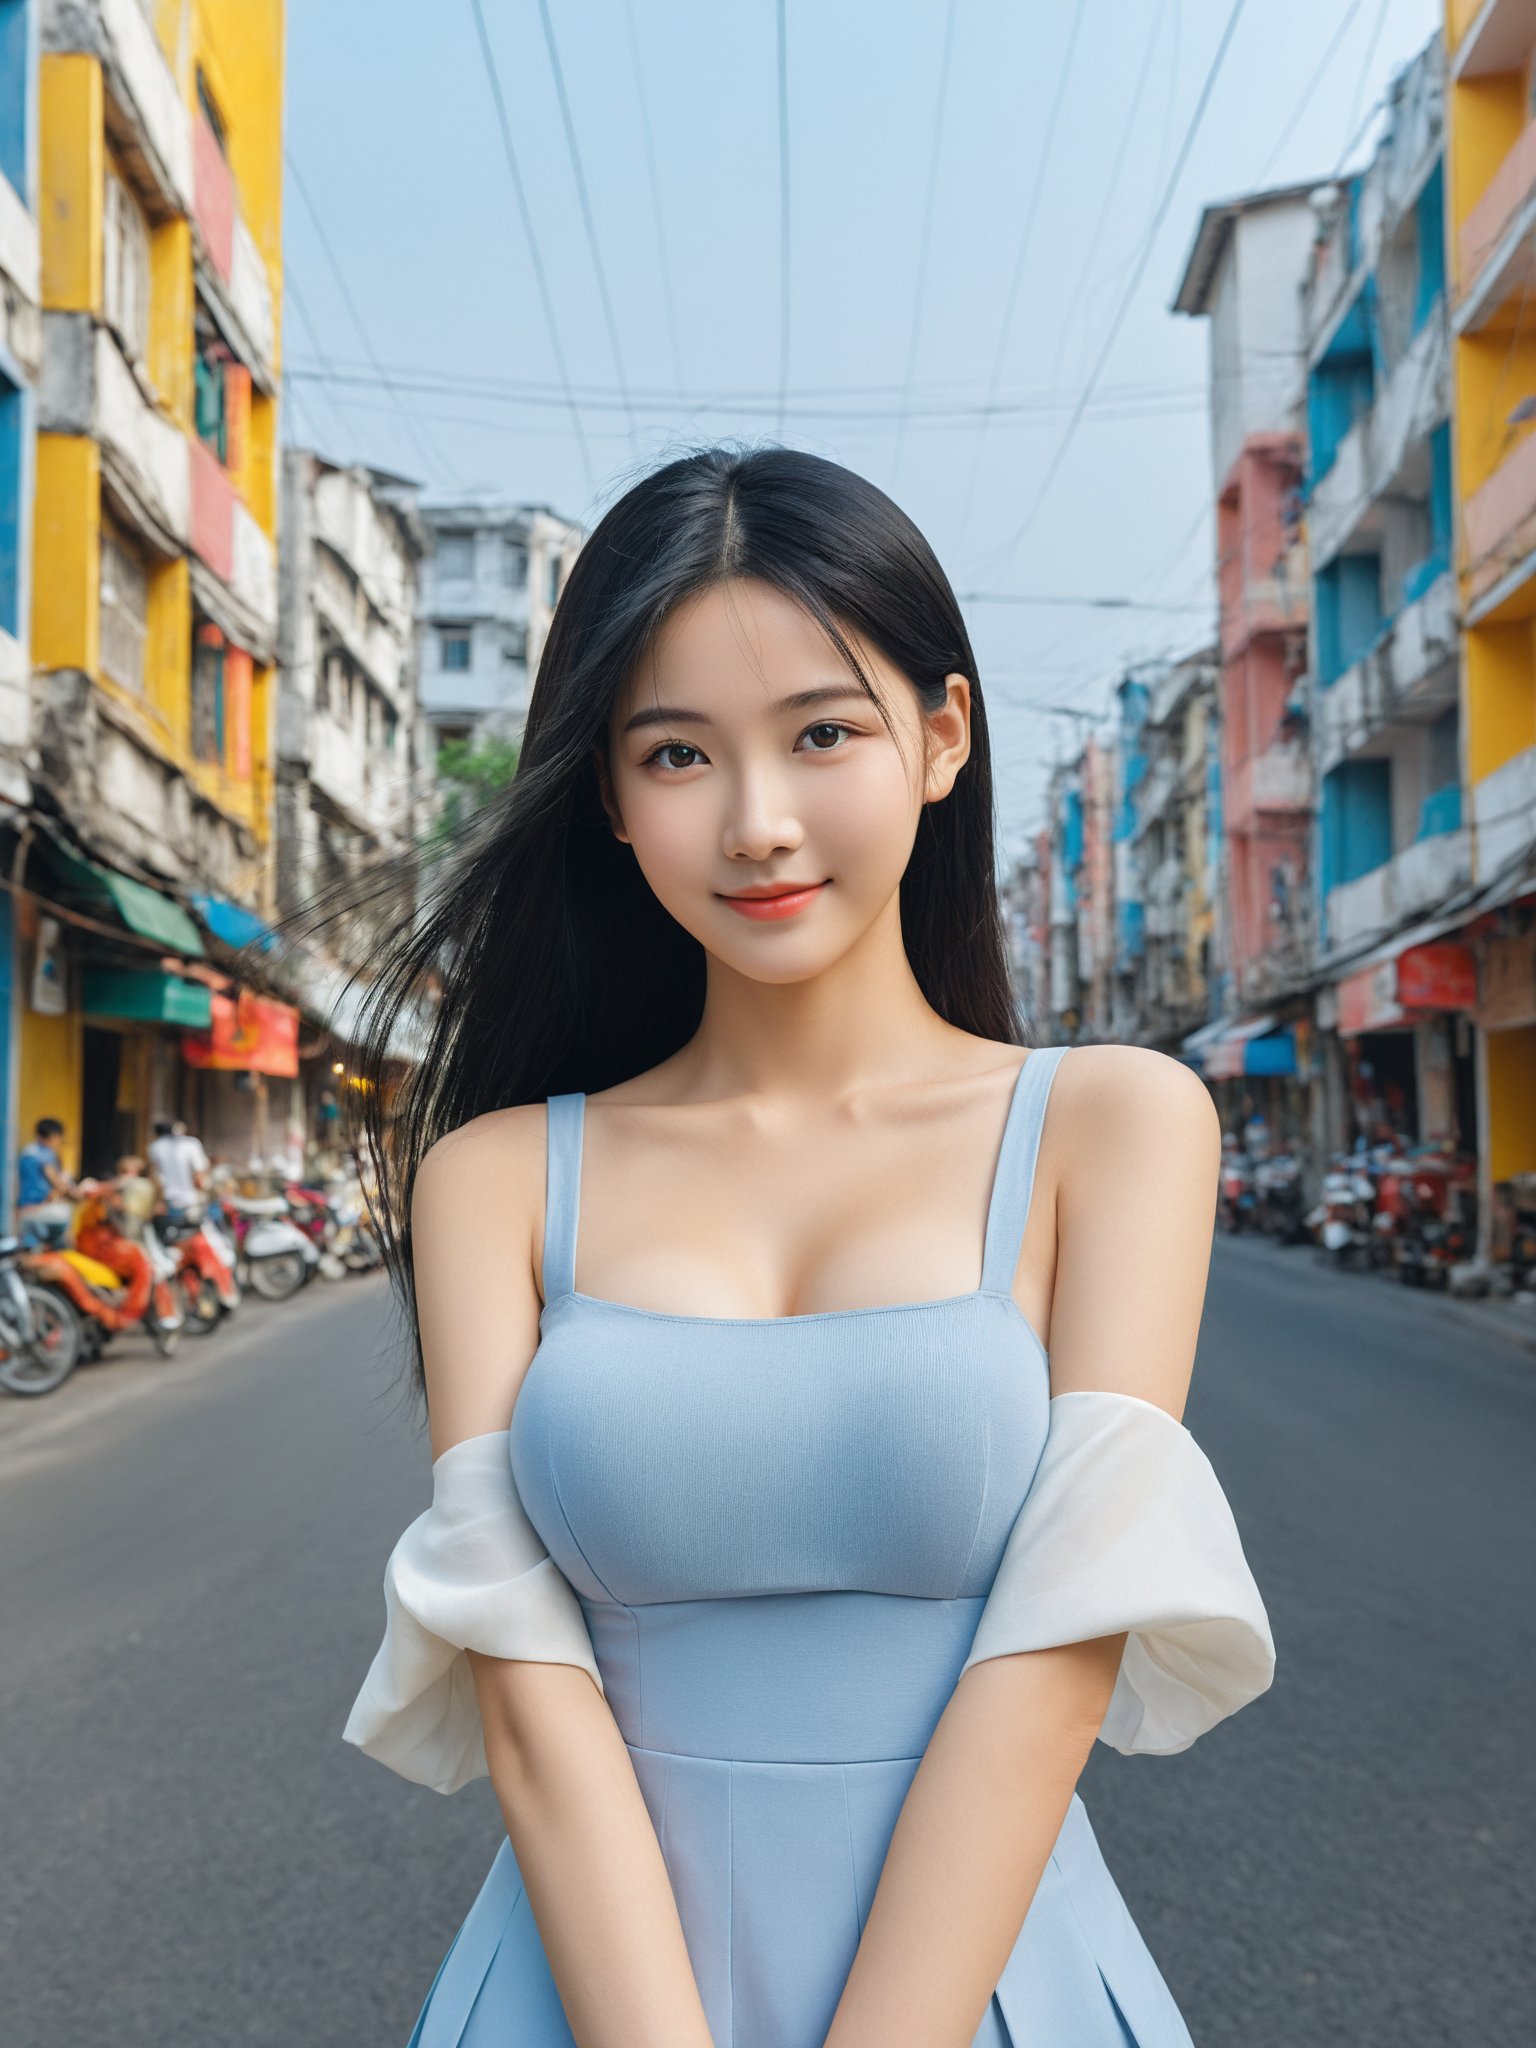 masterpiece, best quality, realistic, photo, real, incredibly_absurdres, Ultra HD,Affectionately looking at you,8K,UHD,in the city street,simple background, upper body, arms behind head,arms behind back , bust photo,The 18-year-old vietnamese girl, full body ,She has black hair. The lines of her face are soft and smooth. Her skin is as fair as snow, soft and delicate, and her eyes are bright and bright, deep and mysterious, making people feel endless charm and appeal. The eyebrows are slender and graceful, the nose is straight and noble, the lips are rosy and seductive, and the slightly raised angle reveals confidence and elegance. Her facial features are delicate and three-dimensional, with well-defined contours, like a fine painting or a finely carved work of art. The overall feeling is gentle, elegant, noble and full of charm.masterpiece, best quality, realistic, photo, real, absurdres, incredibly_absurdres, huge_filesize, bust, girl, kawaii, adorable girl, bishoujo, ojousama, idol, student, long hair, black hair, beautiful detailed eyes, looking at viewer, seductive smile, black eyes, large breasts, arms behind back ,